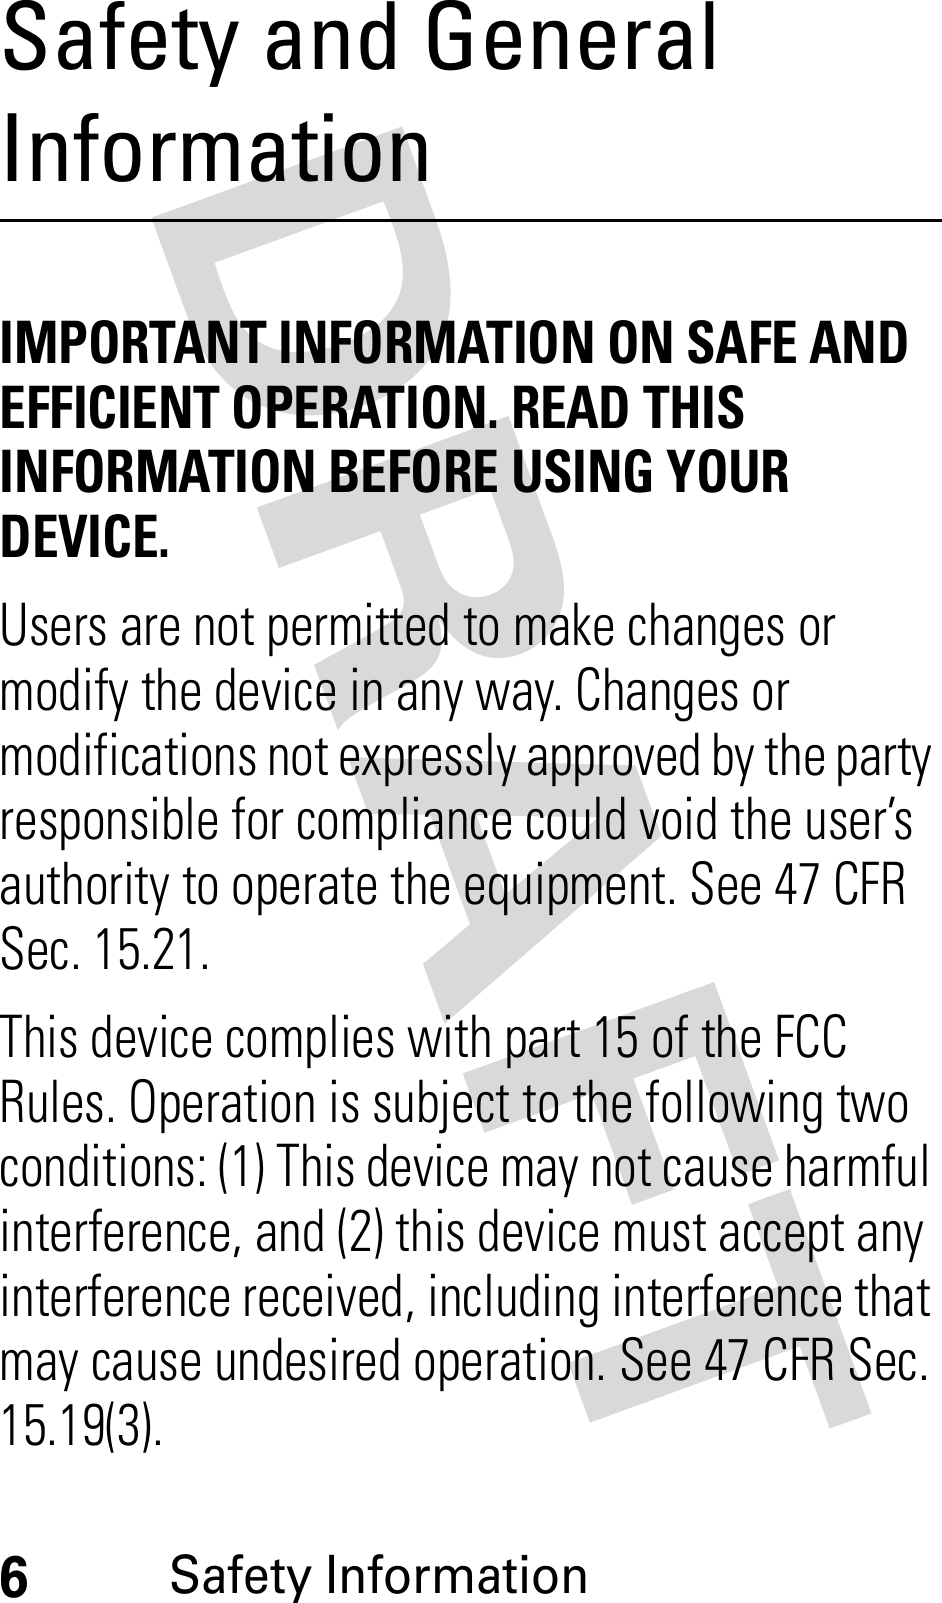 6Safety InformationSafety and General InformationSafety InformationIMPORTANT INFORMATION ON SAFE AND EFFICIENT OPERATION. READ THIS INFORMATION BEFORE USING YOUR DEVICE.Users are not permitted to make changes or modify the device in any way. Changes or modifications not expressly approved by the party responsible for compliance could void the user’s authority to operate the equipment. See 47 CFR Sec. 15.21.This device complies with part 15 of the FCC Rules. Operation is subject to the following two conditions: (1) This device may not cause harmful interference, and (2) this device must accept any interference received, including interference that may cause undesired operation. See 47 CFR Sec. 15.19(3).